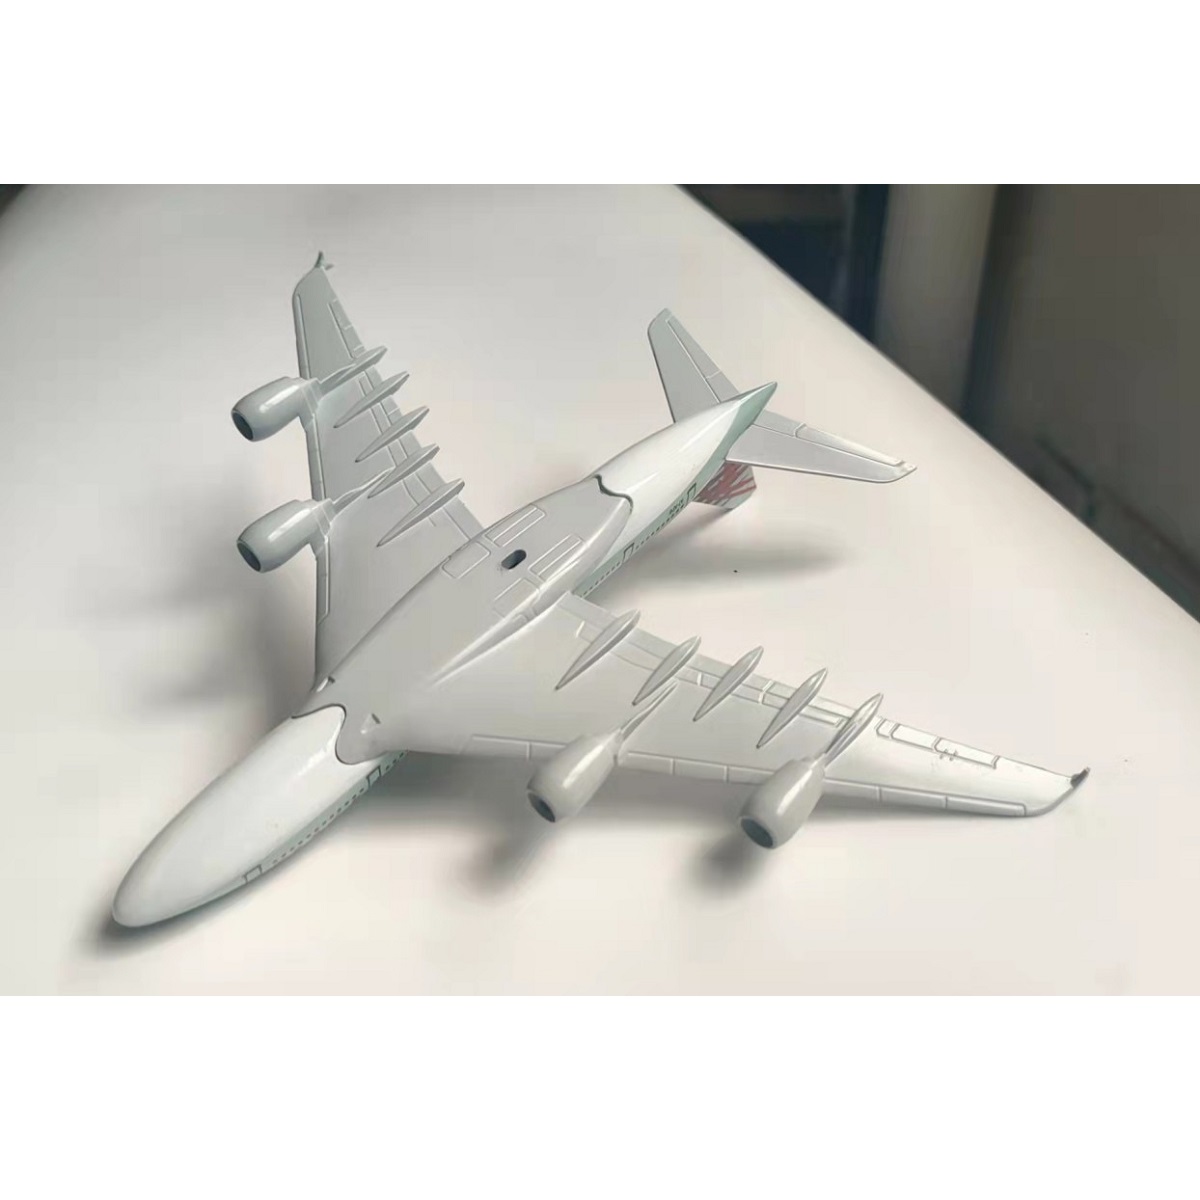 Qatar Airways Airbus A380 Replica Toy Model with Stand